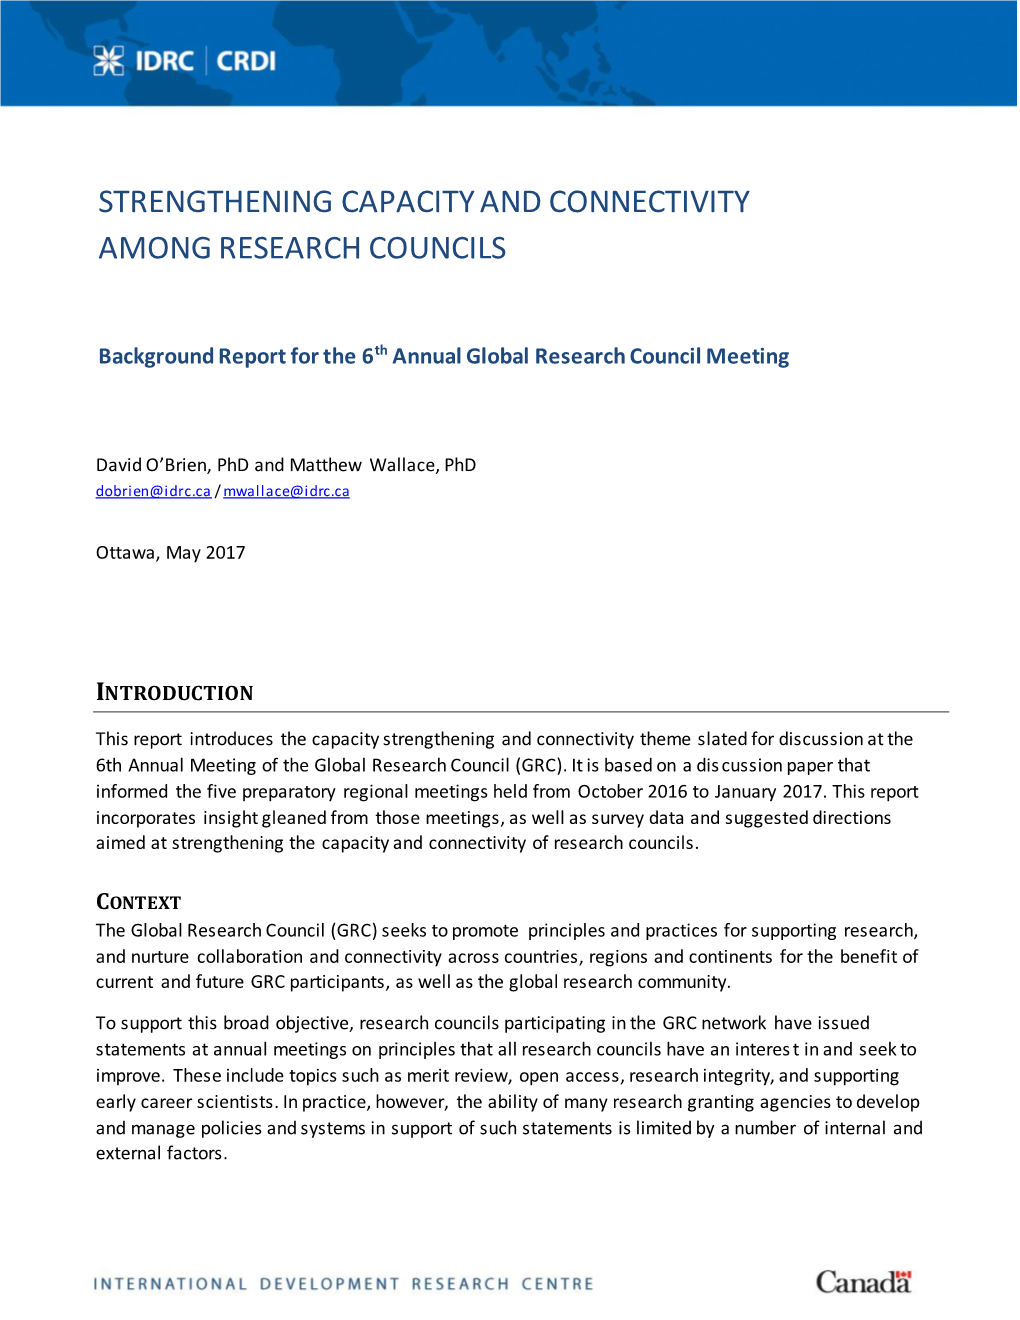 Strengthening Capacity and Connectivity Among Research Councils